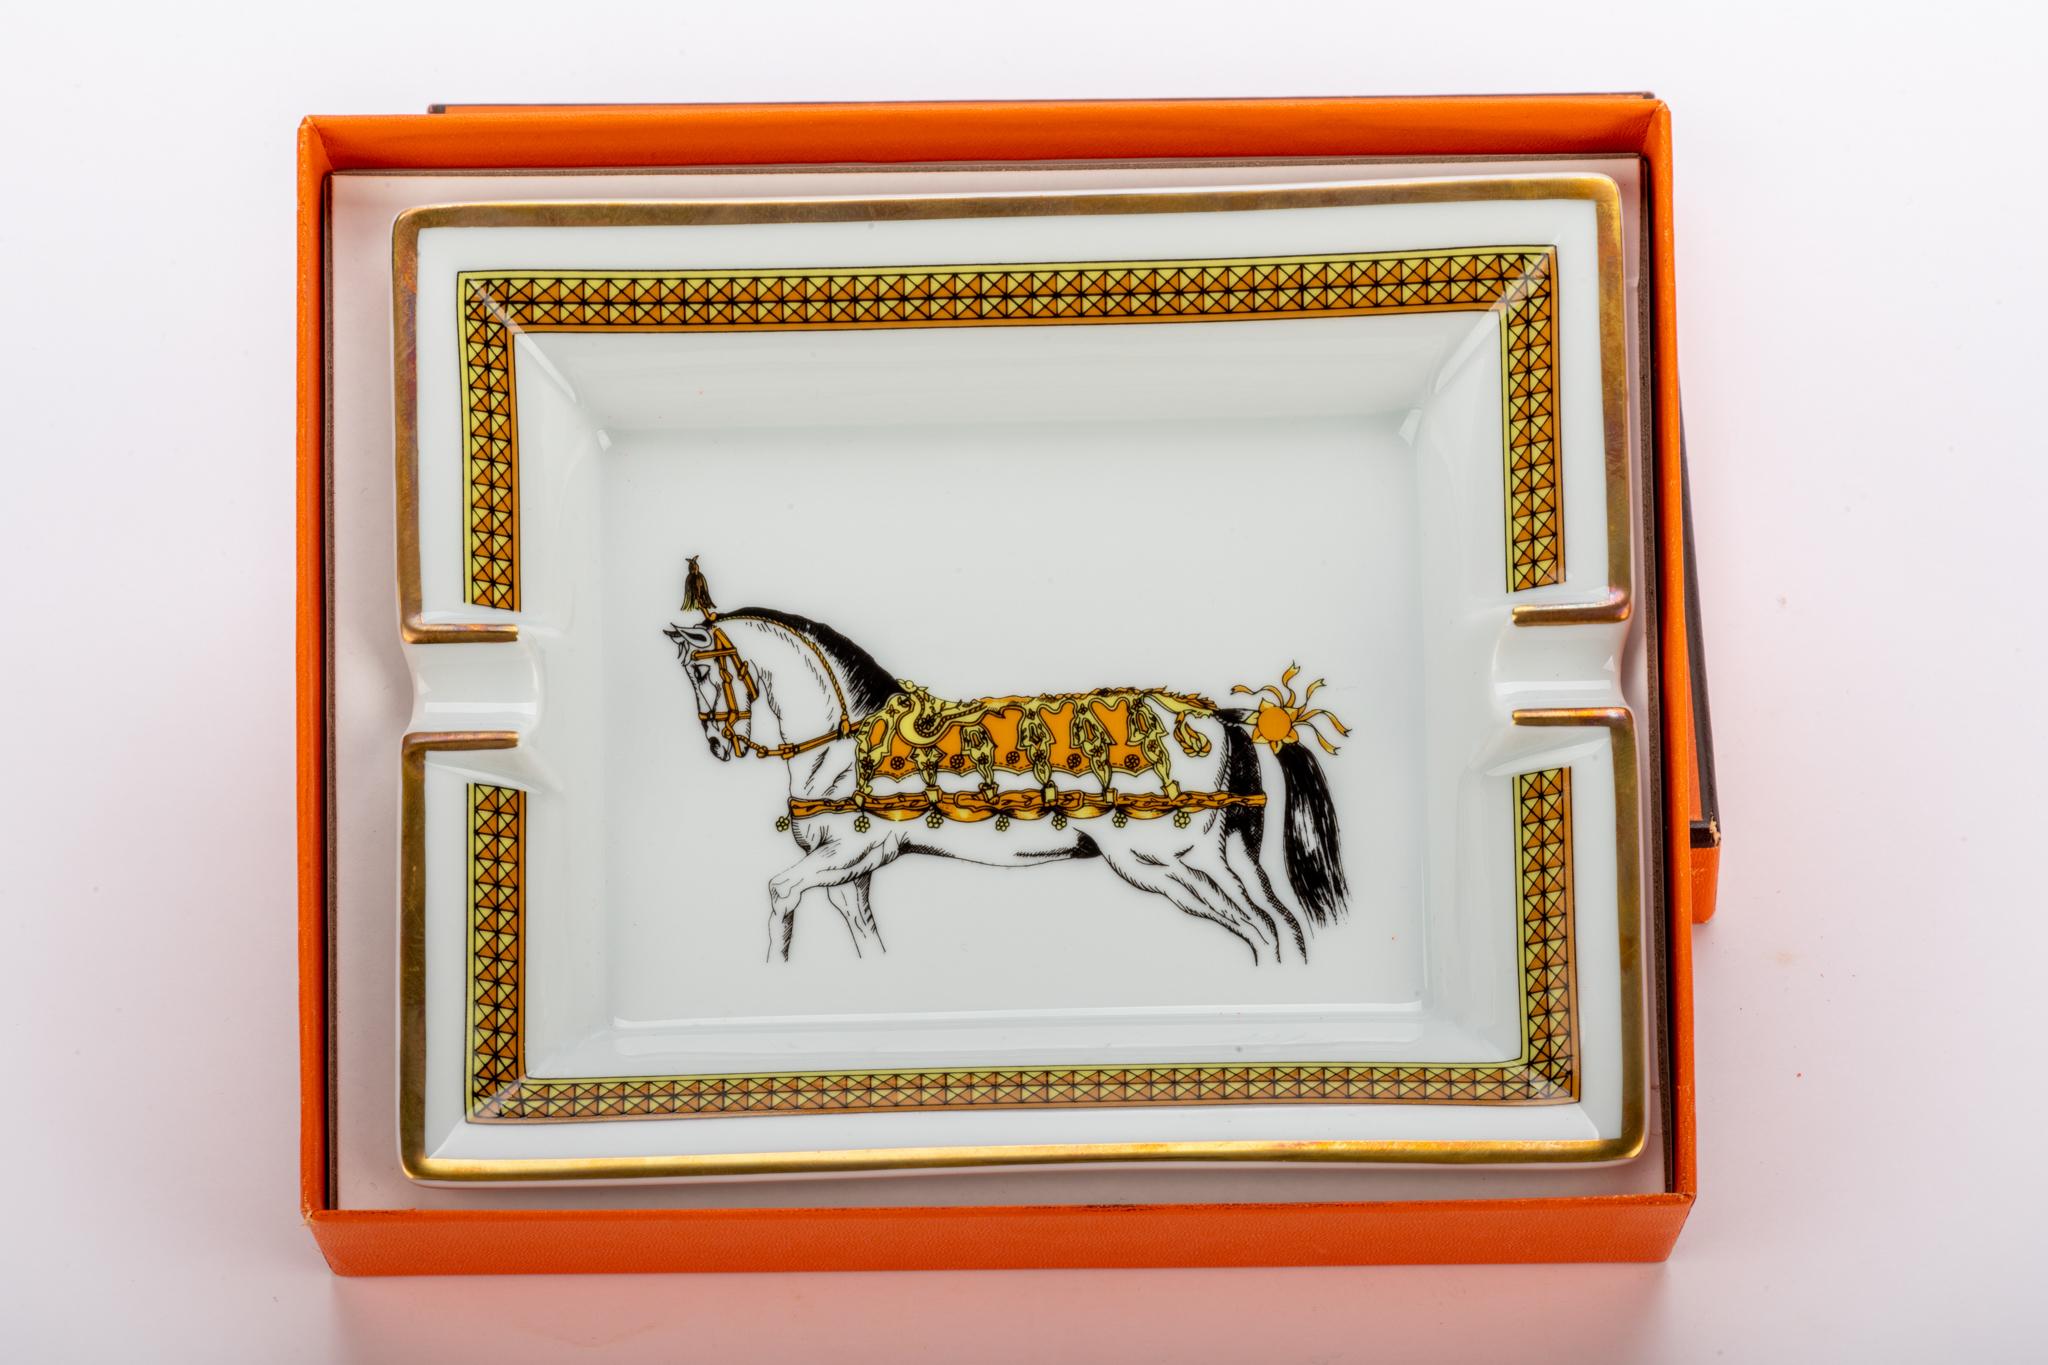 Hermes Gold Horse Porcelain Ashtray In Excellent Condition For Sale In West Hollywood, CA